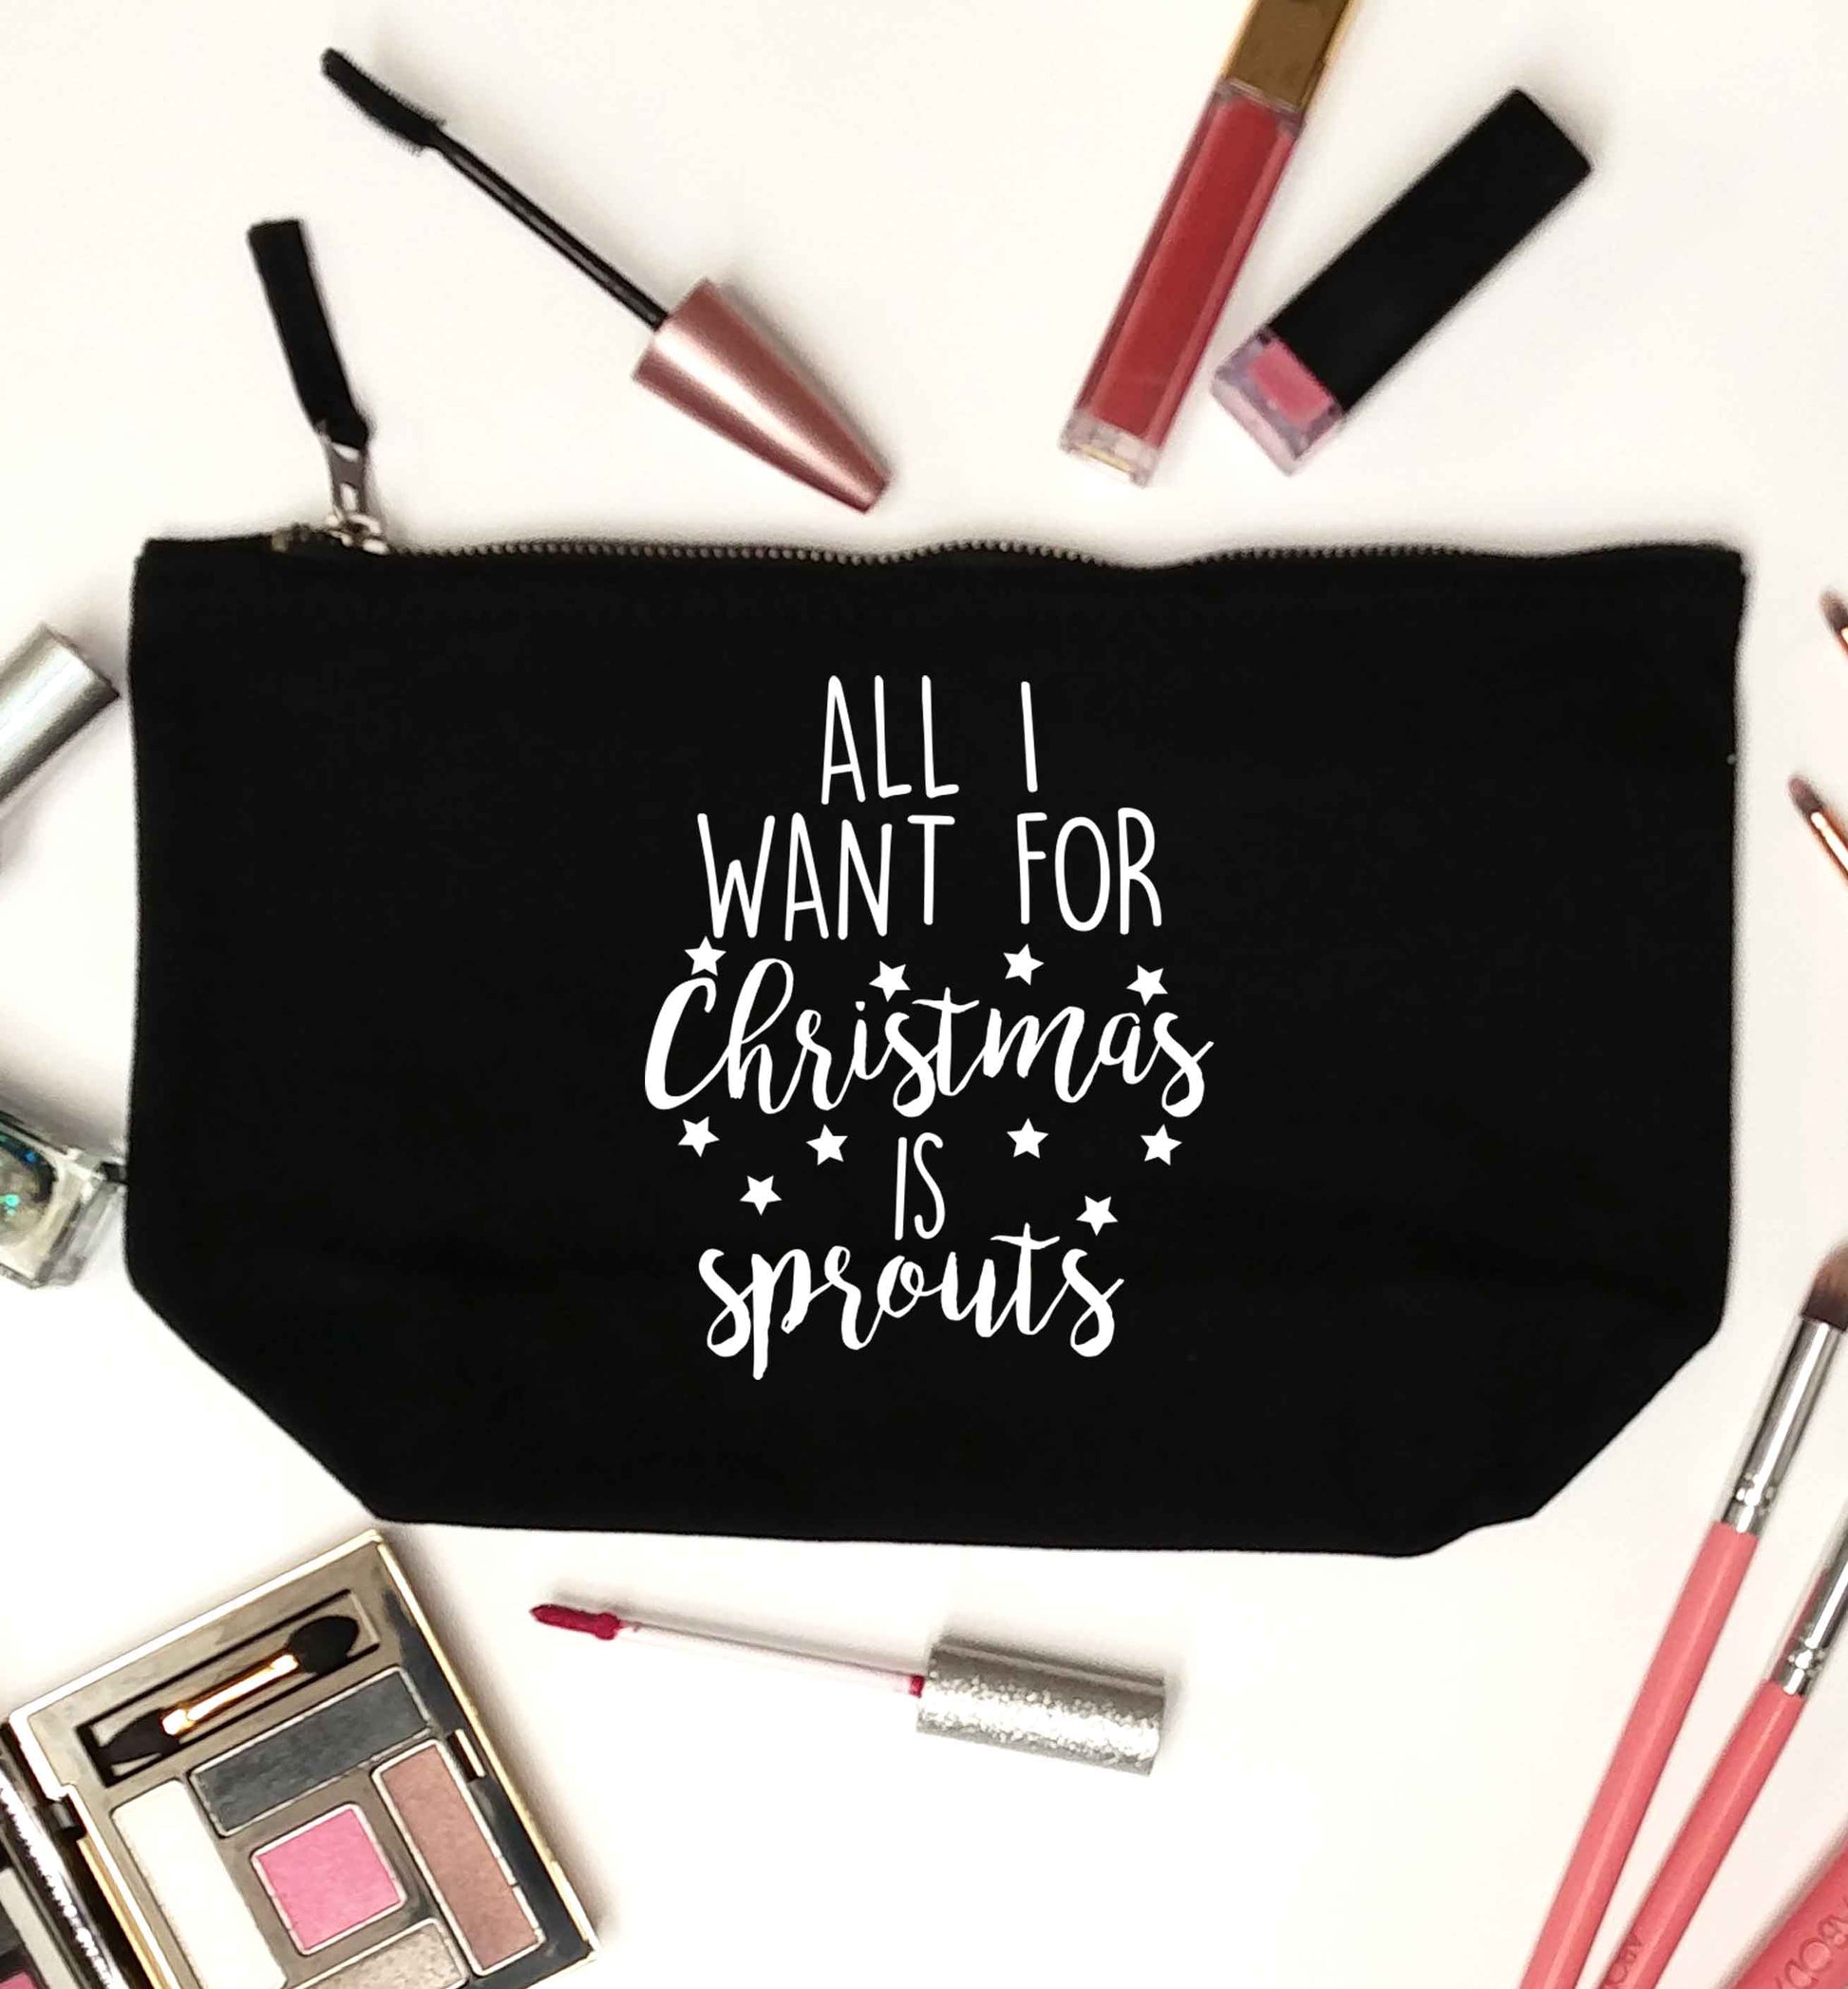 All I want for Christmas is sprouts black makeup bag